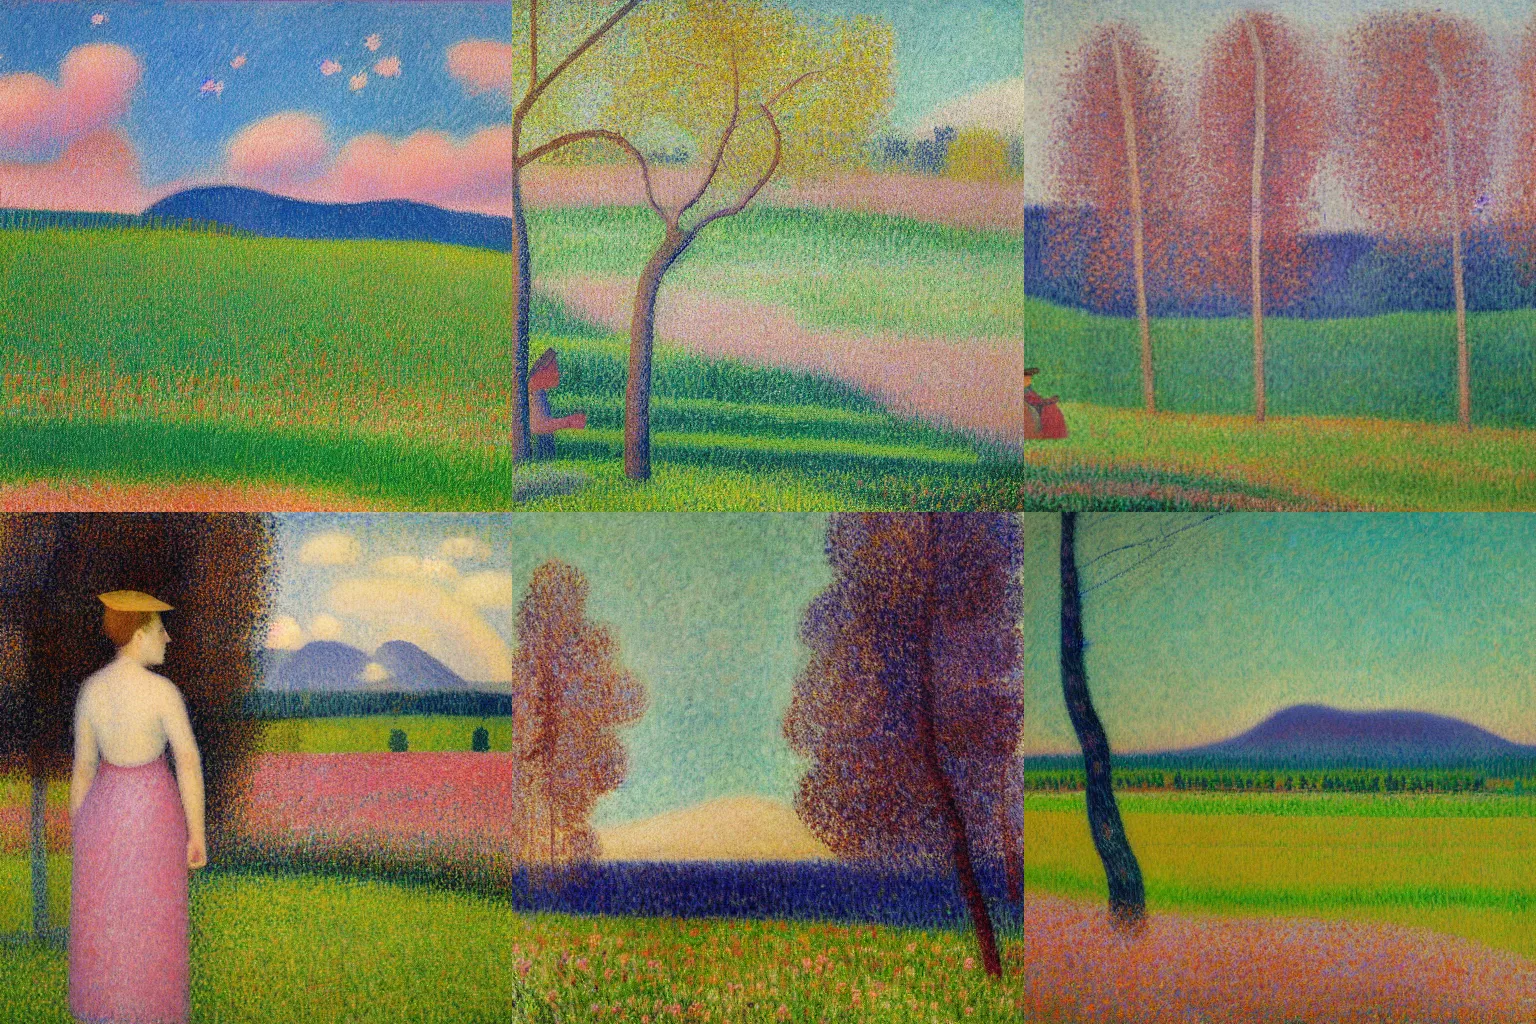 Prompt: A beautiful oil painting of a birch tree standing in a spring meadow with pink flowers, a distant mountain towers over the field in the distance. Artwork by Georges Seurat, in the style of Louis Hayet and Camille Pissarro.